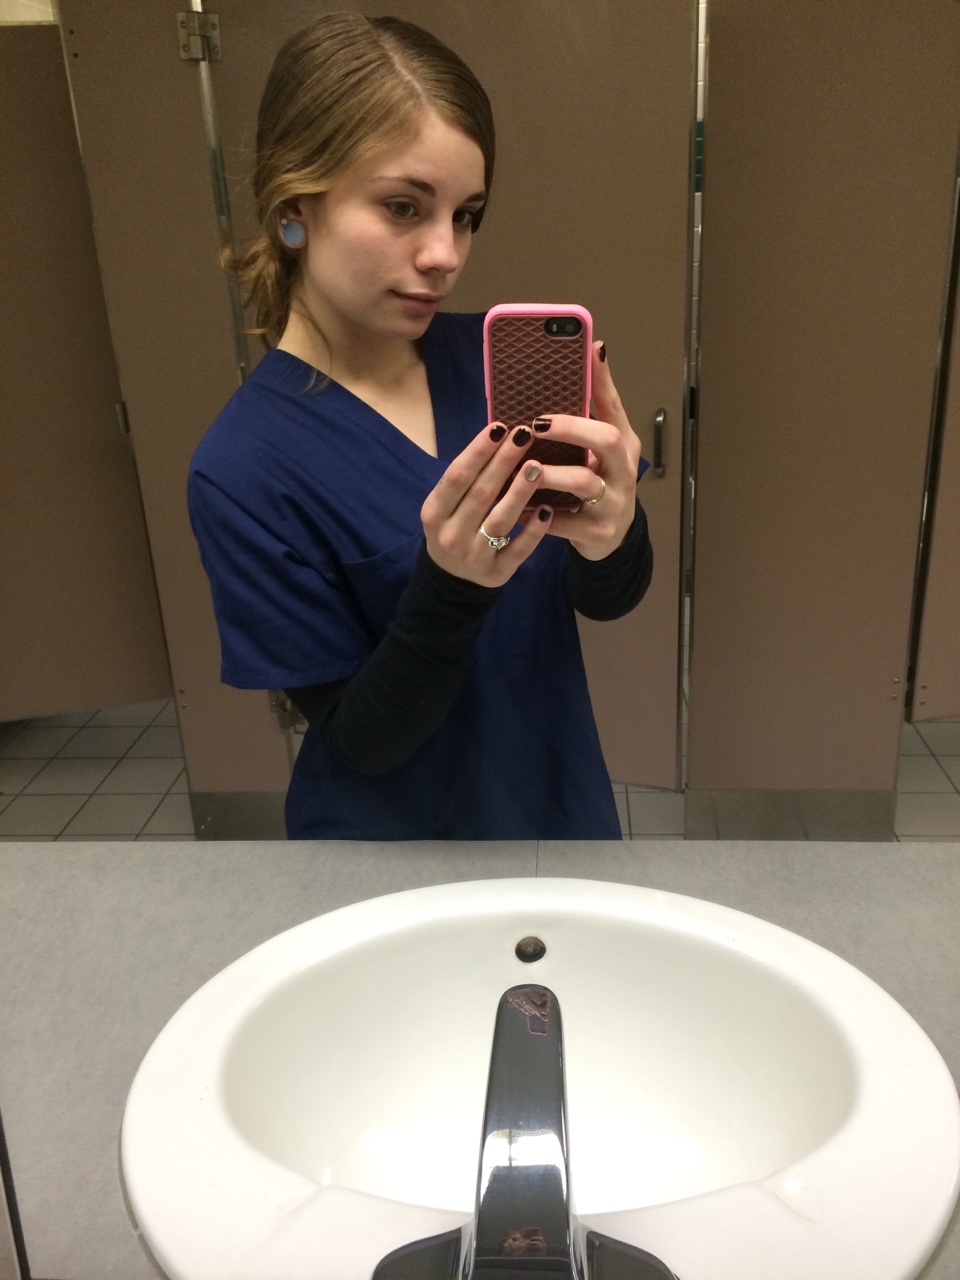 The Cute Dental Assistant